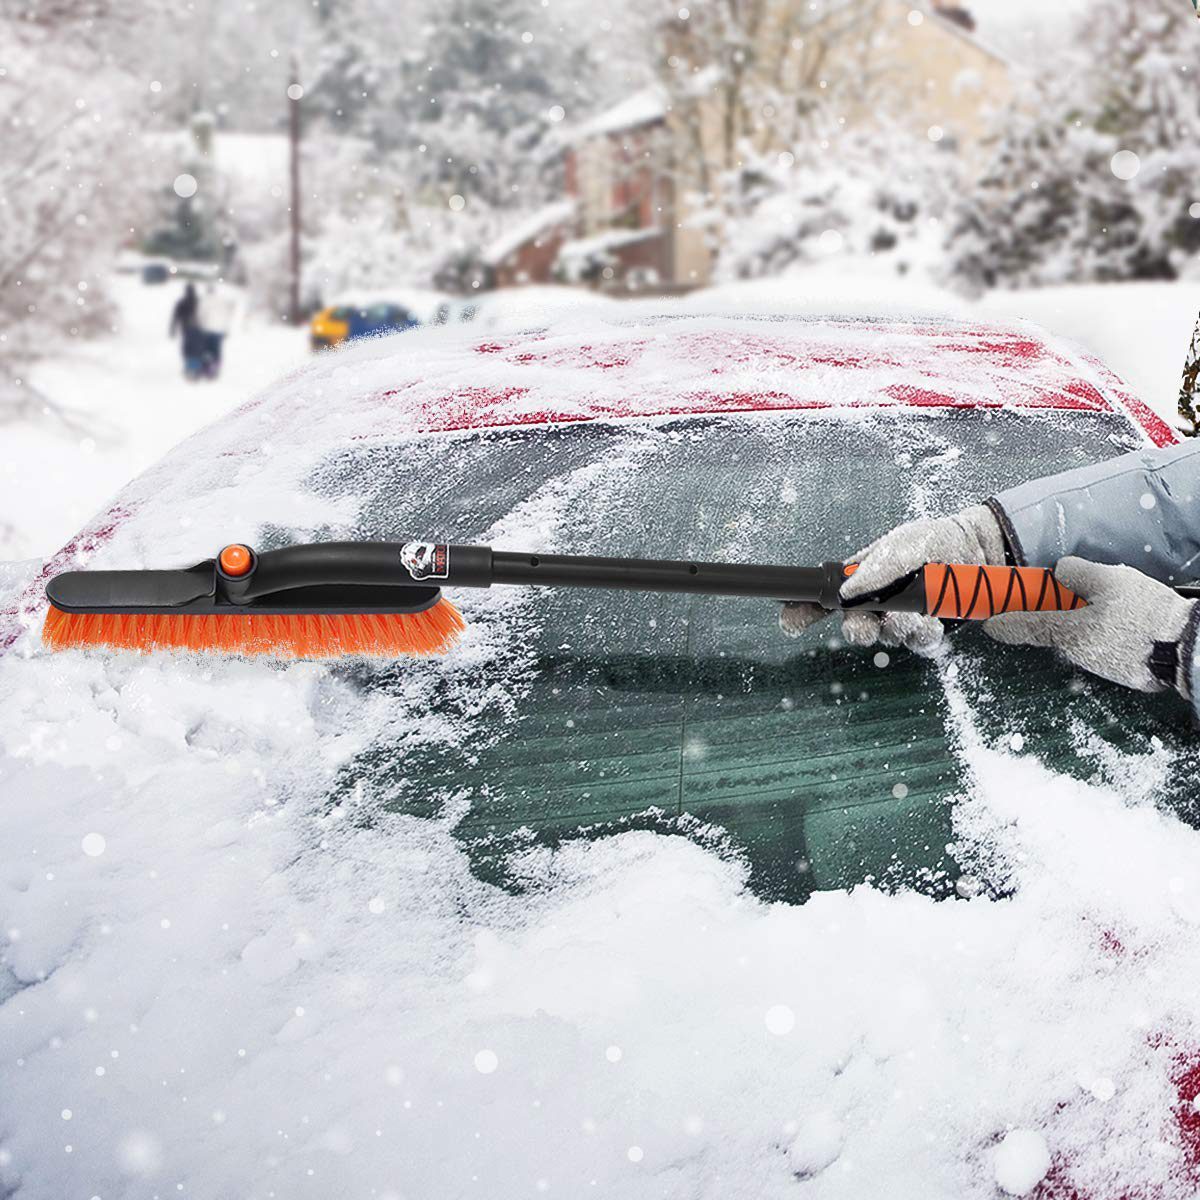 Magic Cone-Shaped Car Windshield Ice Scrapers Car Snow Removal Shovel Tool Leaflai Round Windshield Ice Scrapers 